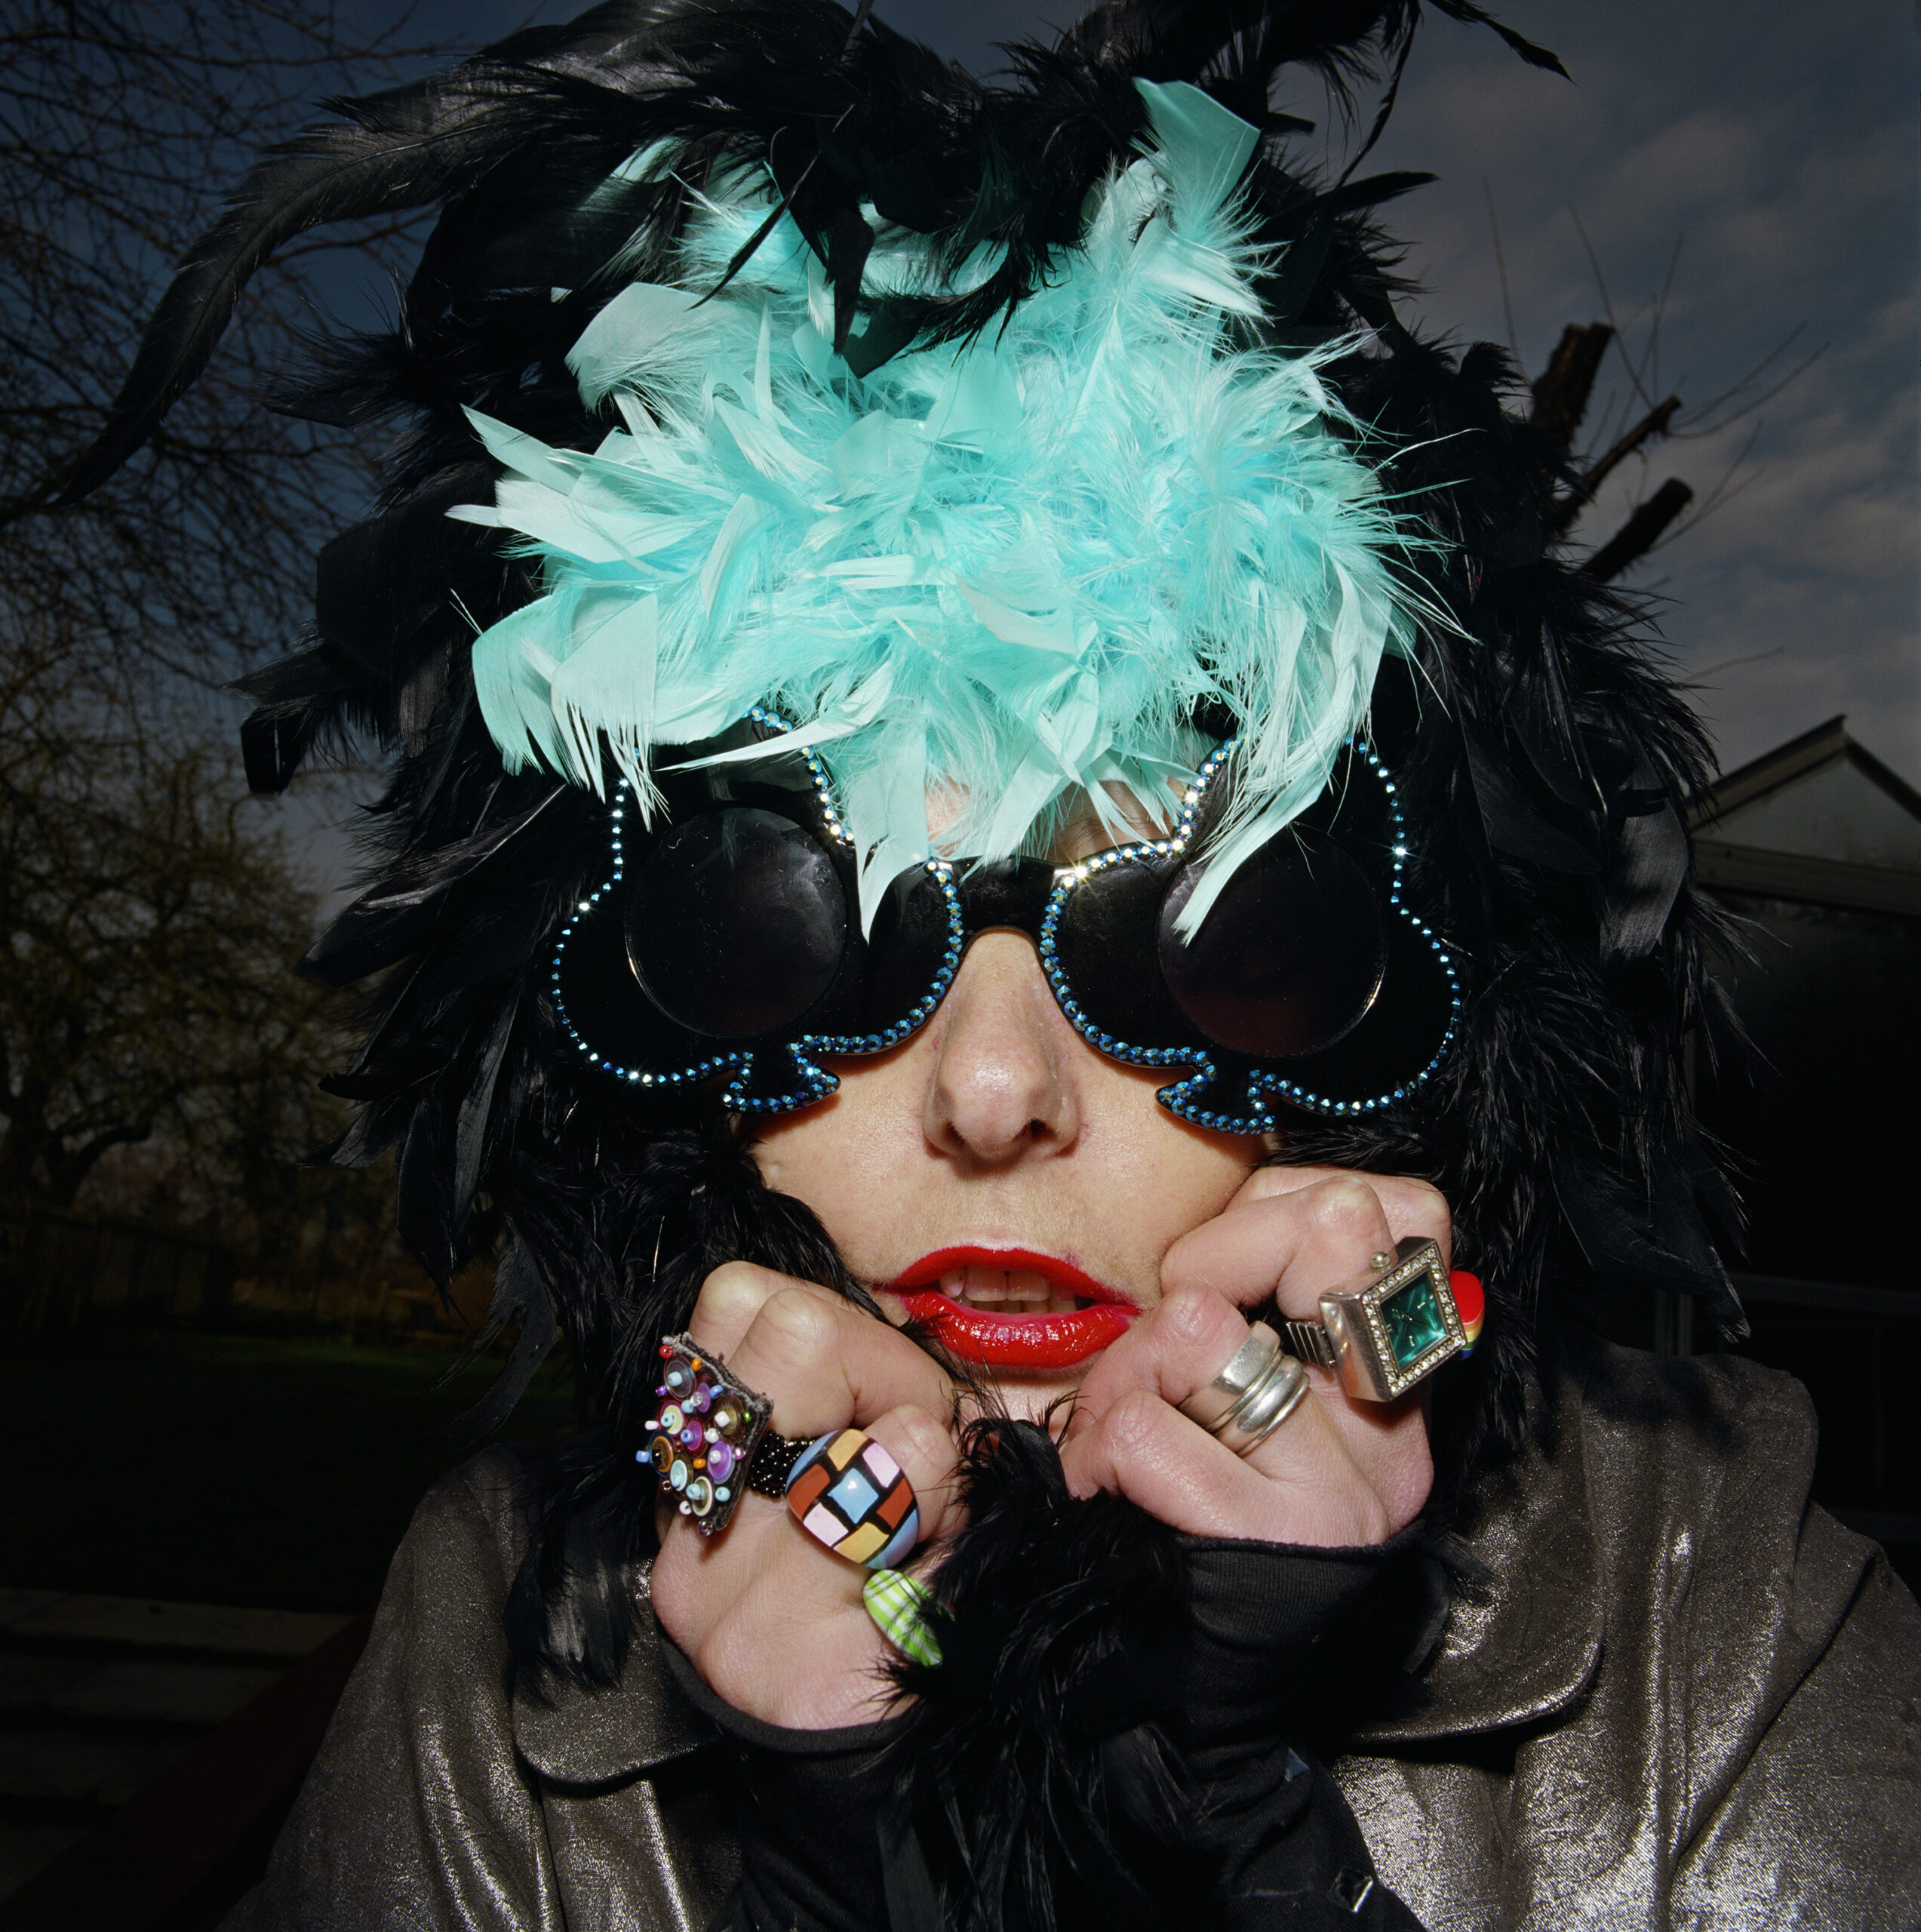 From the exhibition of A Picture of Health, a woman with big jazzy sunglasses is clunching a black and blue feather boa around her head, she's wearing large novelty rings.